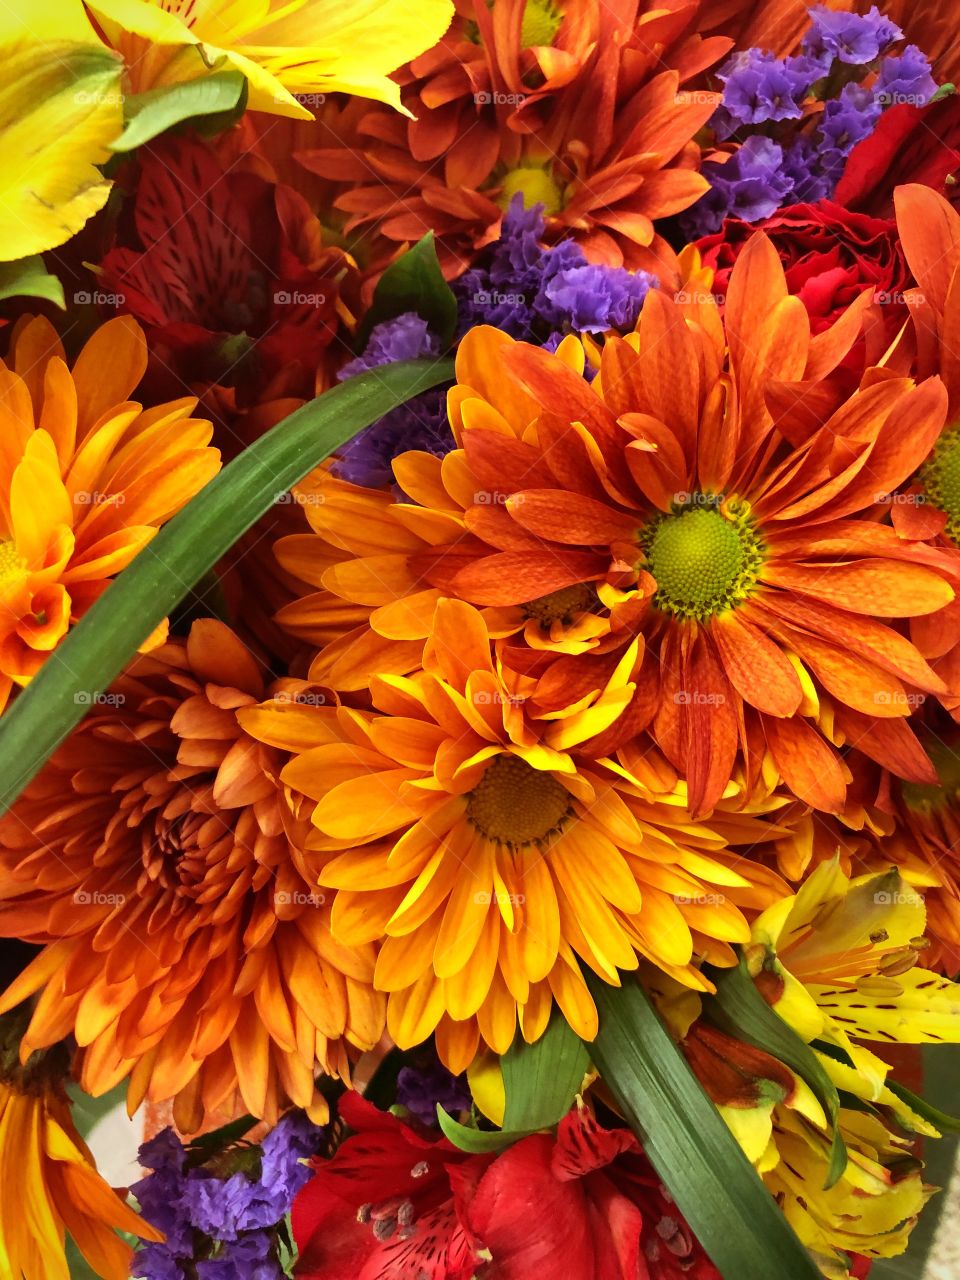 PUTTING TOGETHER A COLORFUL FALL BOUQUET   